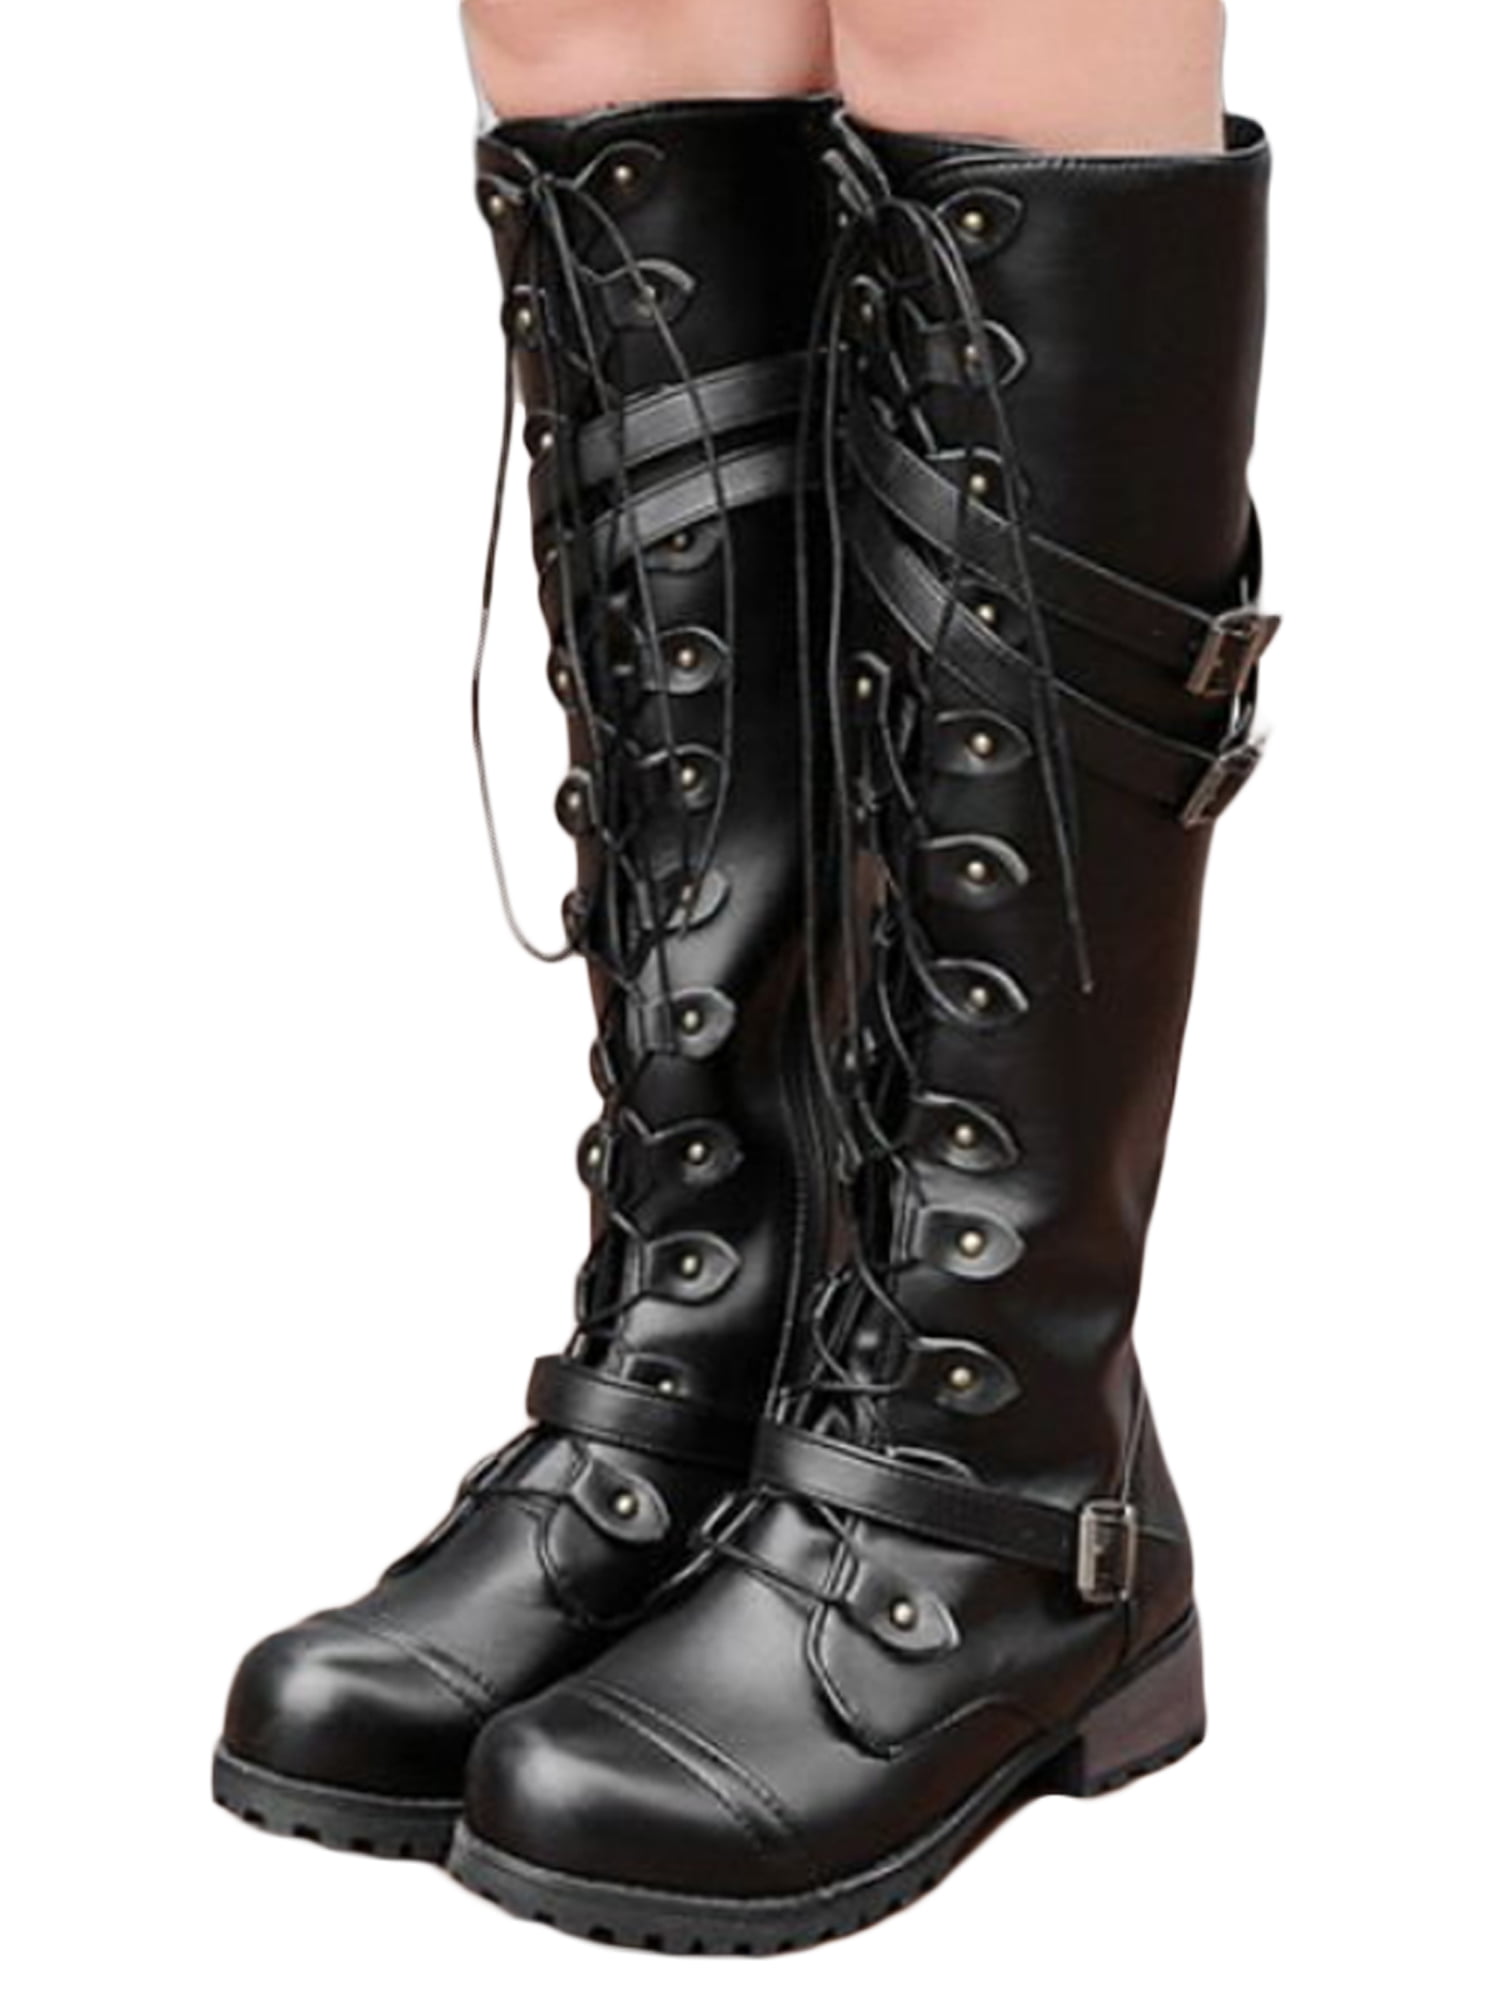 WOMENS LADIES MID HEEL WINTER LACE UP CALF KNEE HIGH RIDING SHOES BOOTS SIZE 